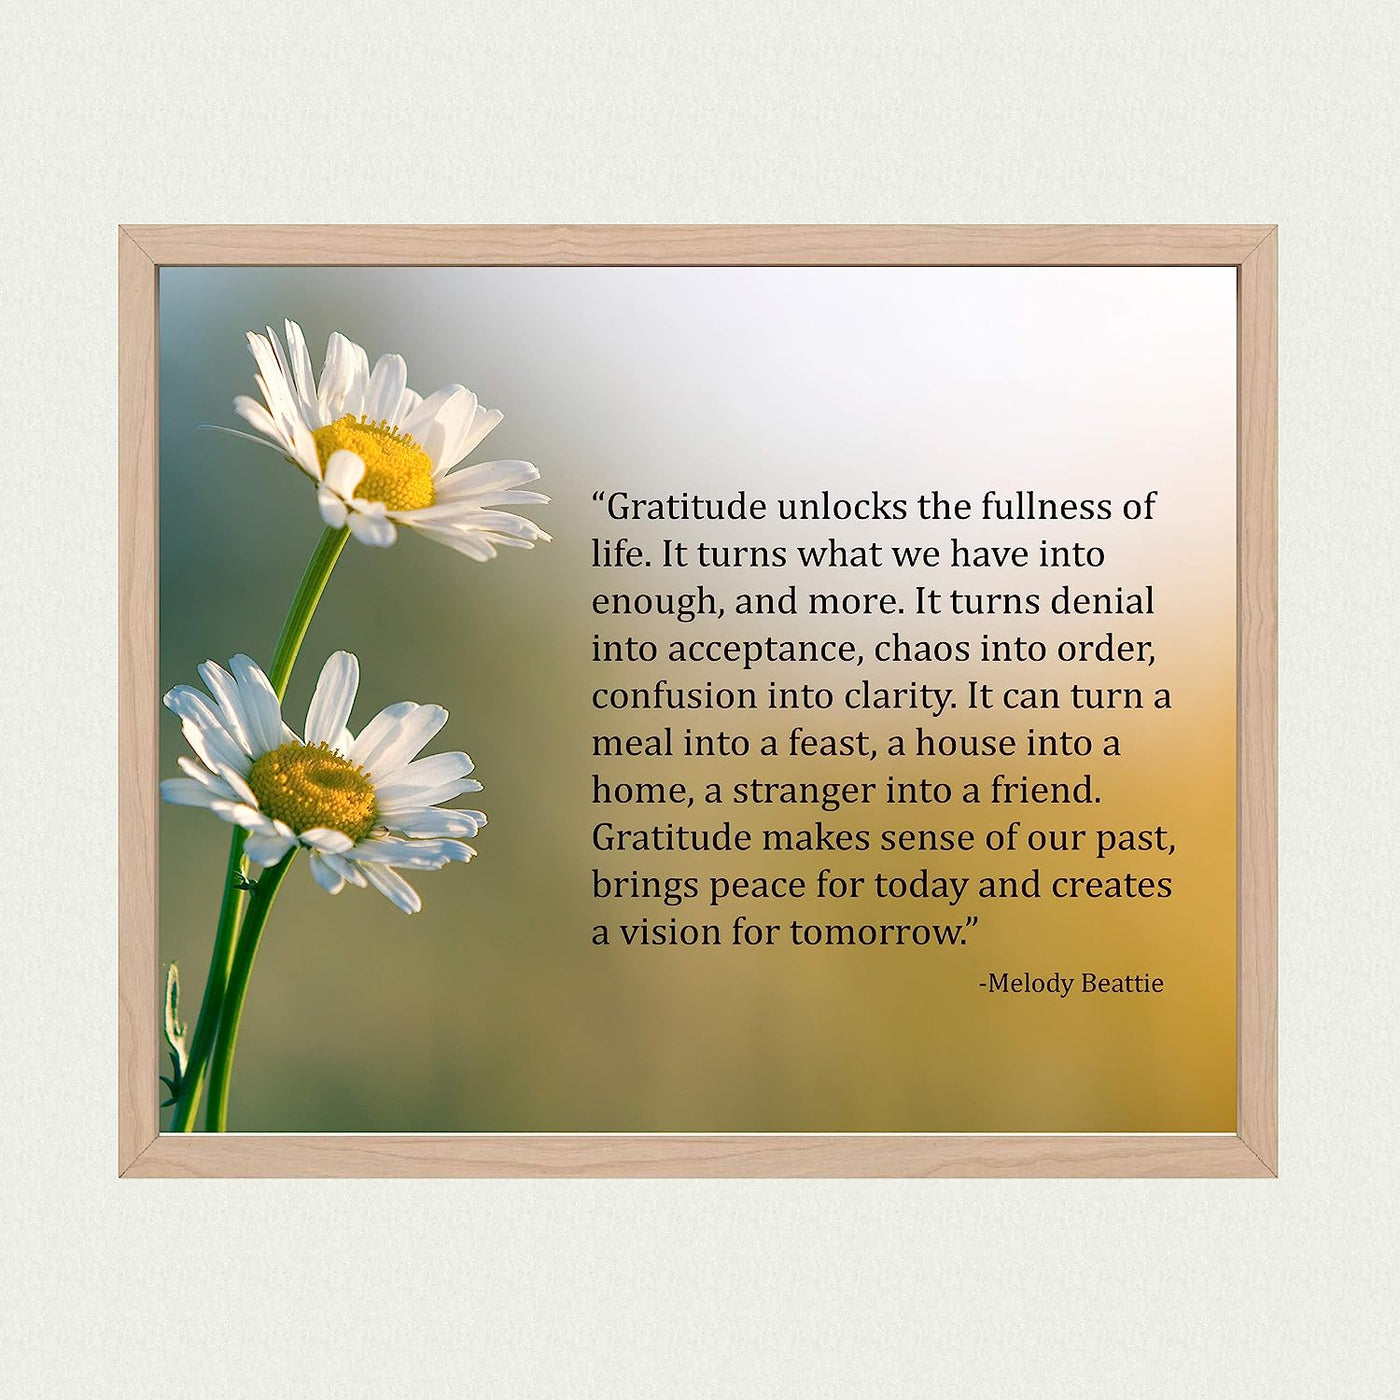 Gratitude Unlocks the Fullness of Life Inspirational Wall Art-10x8" Floral Poster Print-Ready to Frame. Quote By Melody Beattie. Motivational Home-Office-School-Library Decor. Great Advice for All!